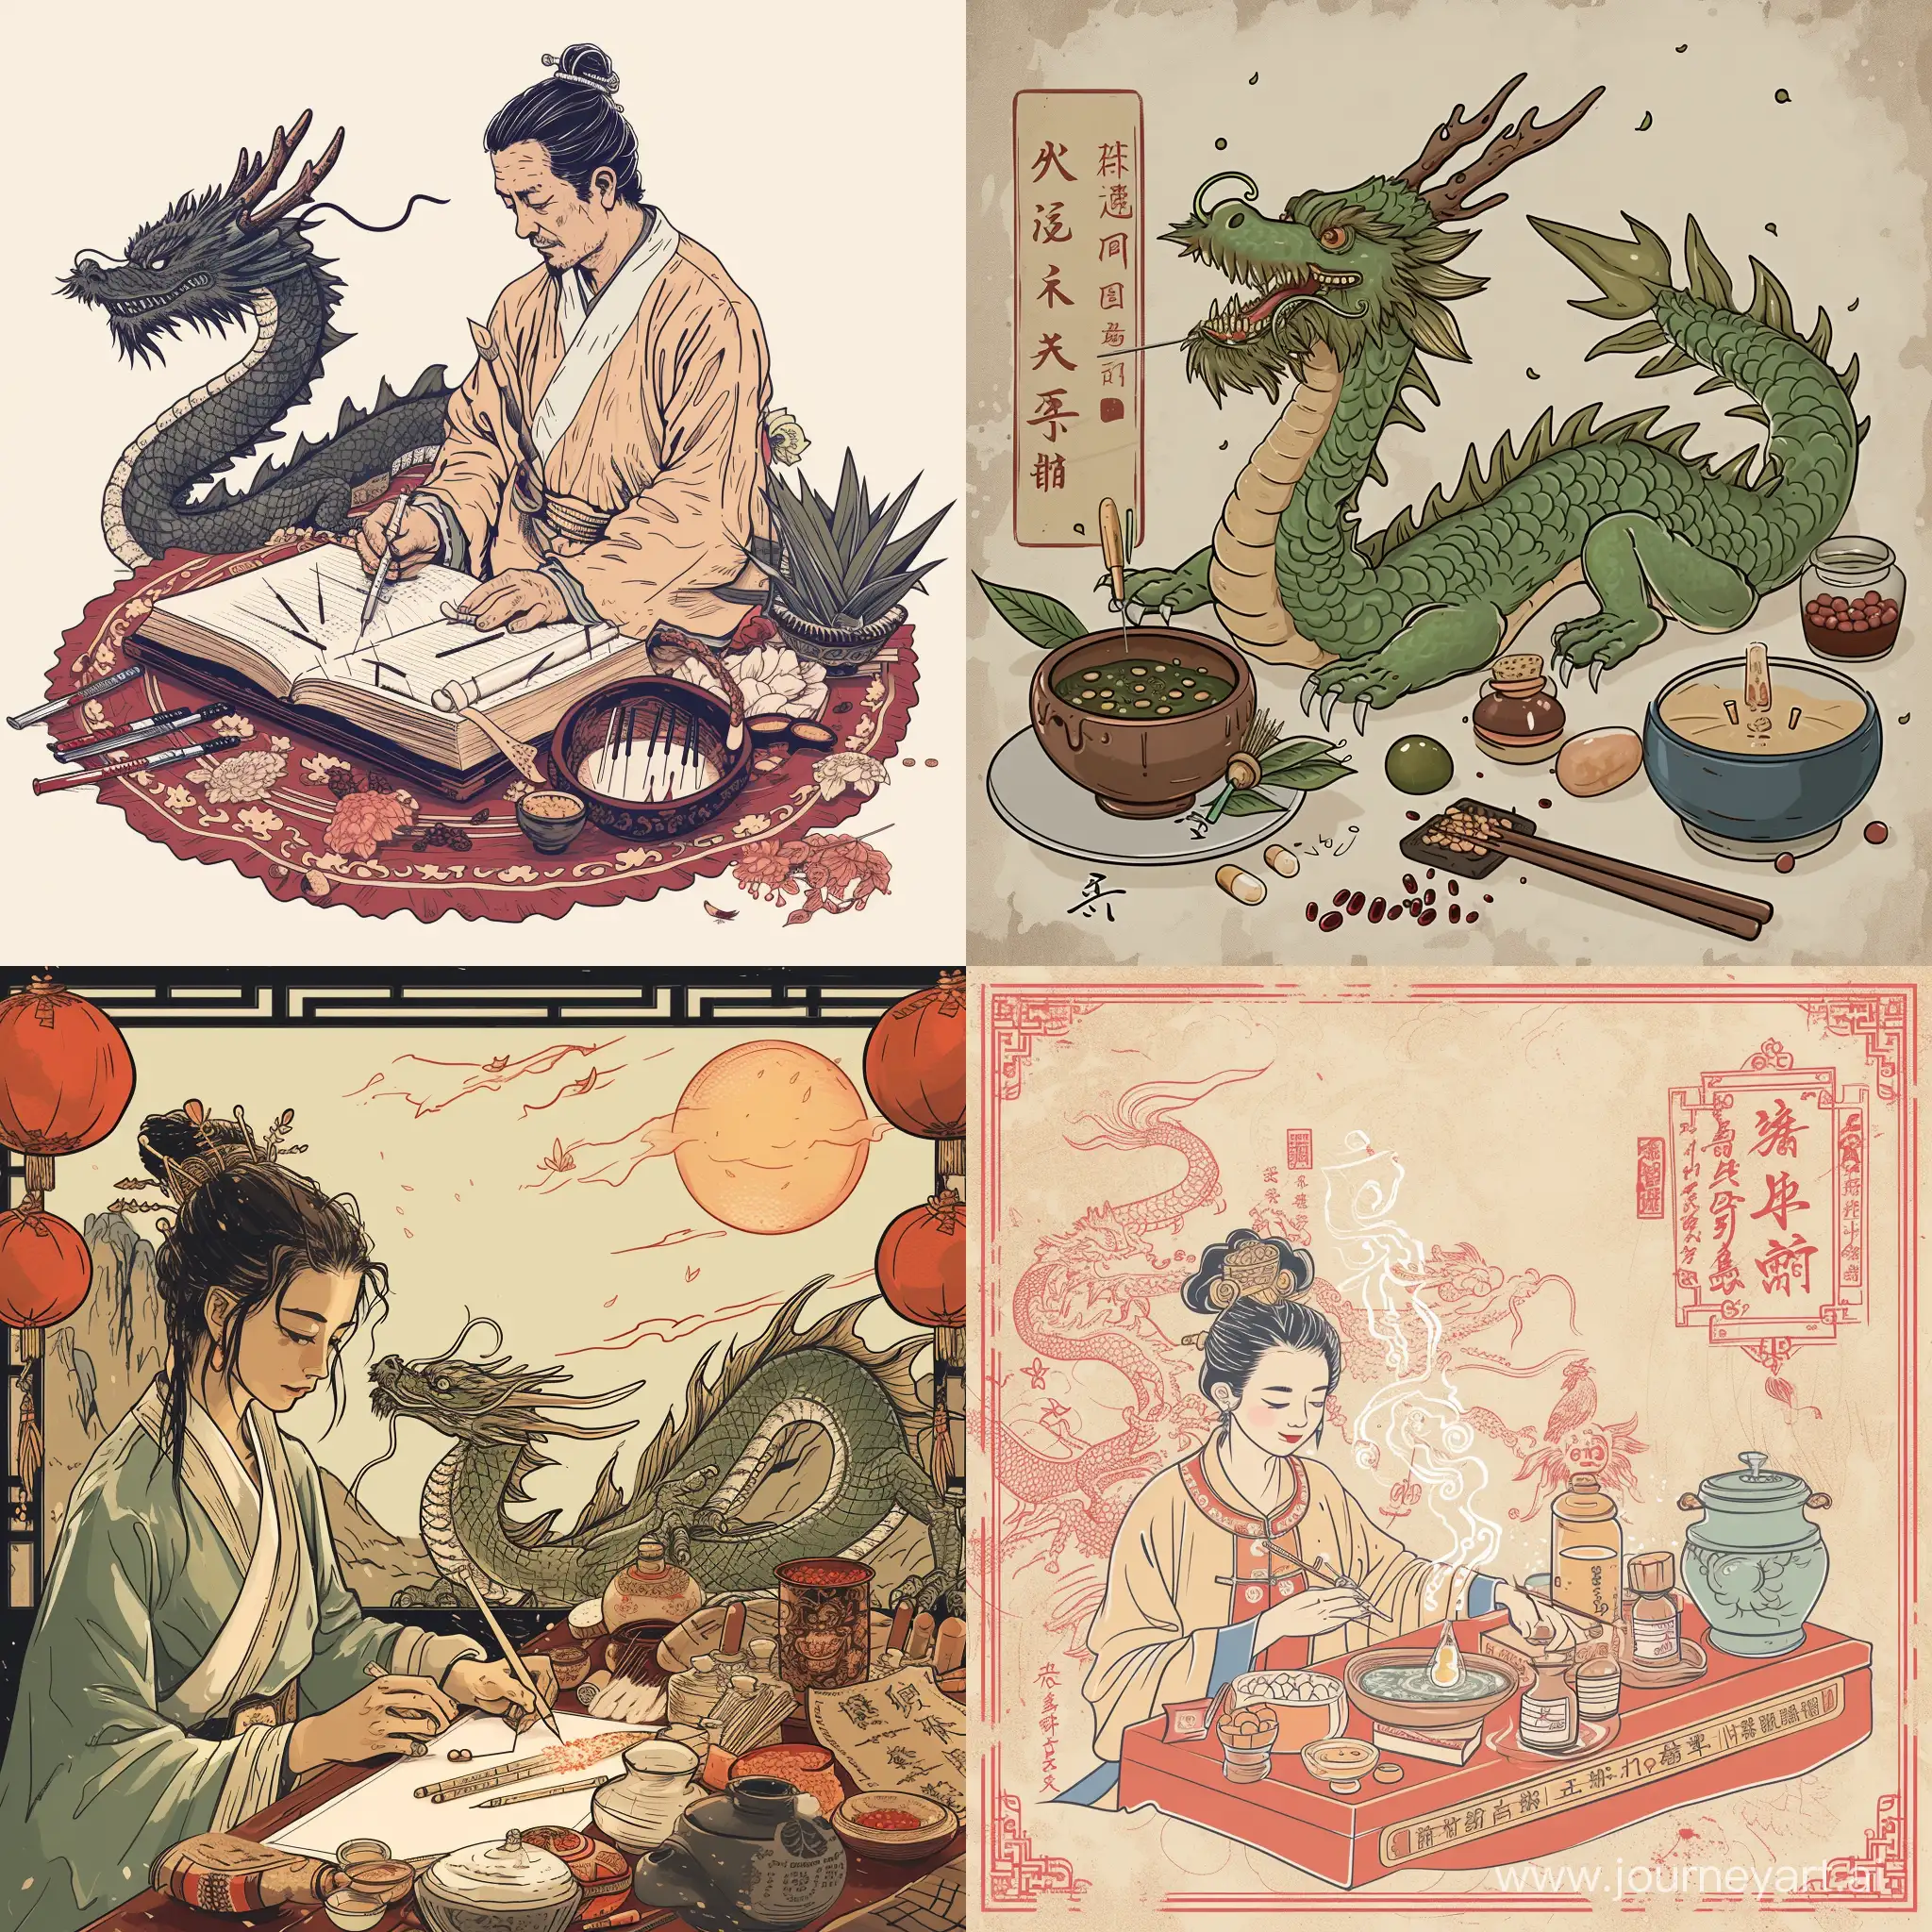 Traditional-Chinese-Medicine-and-Acupuncture-Celebration-in-the-Year-of-the-Dragon